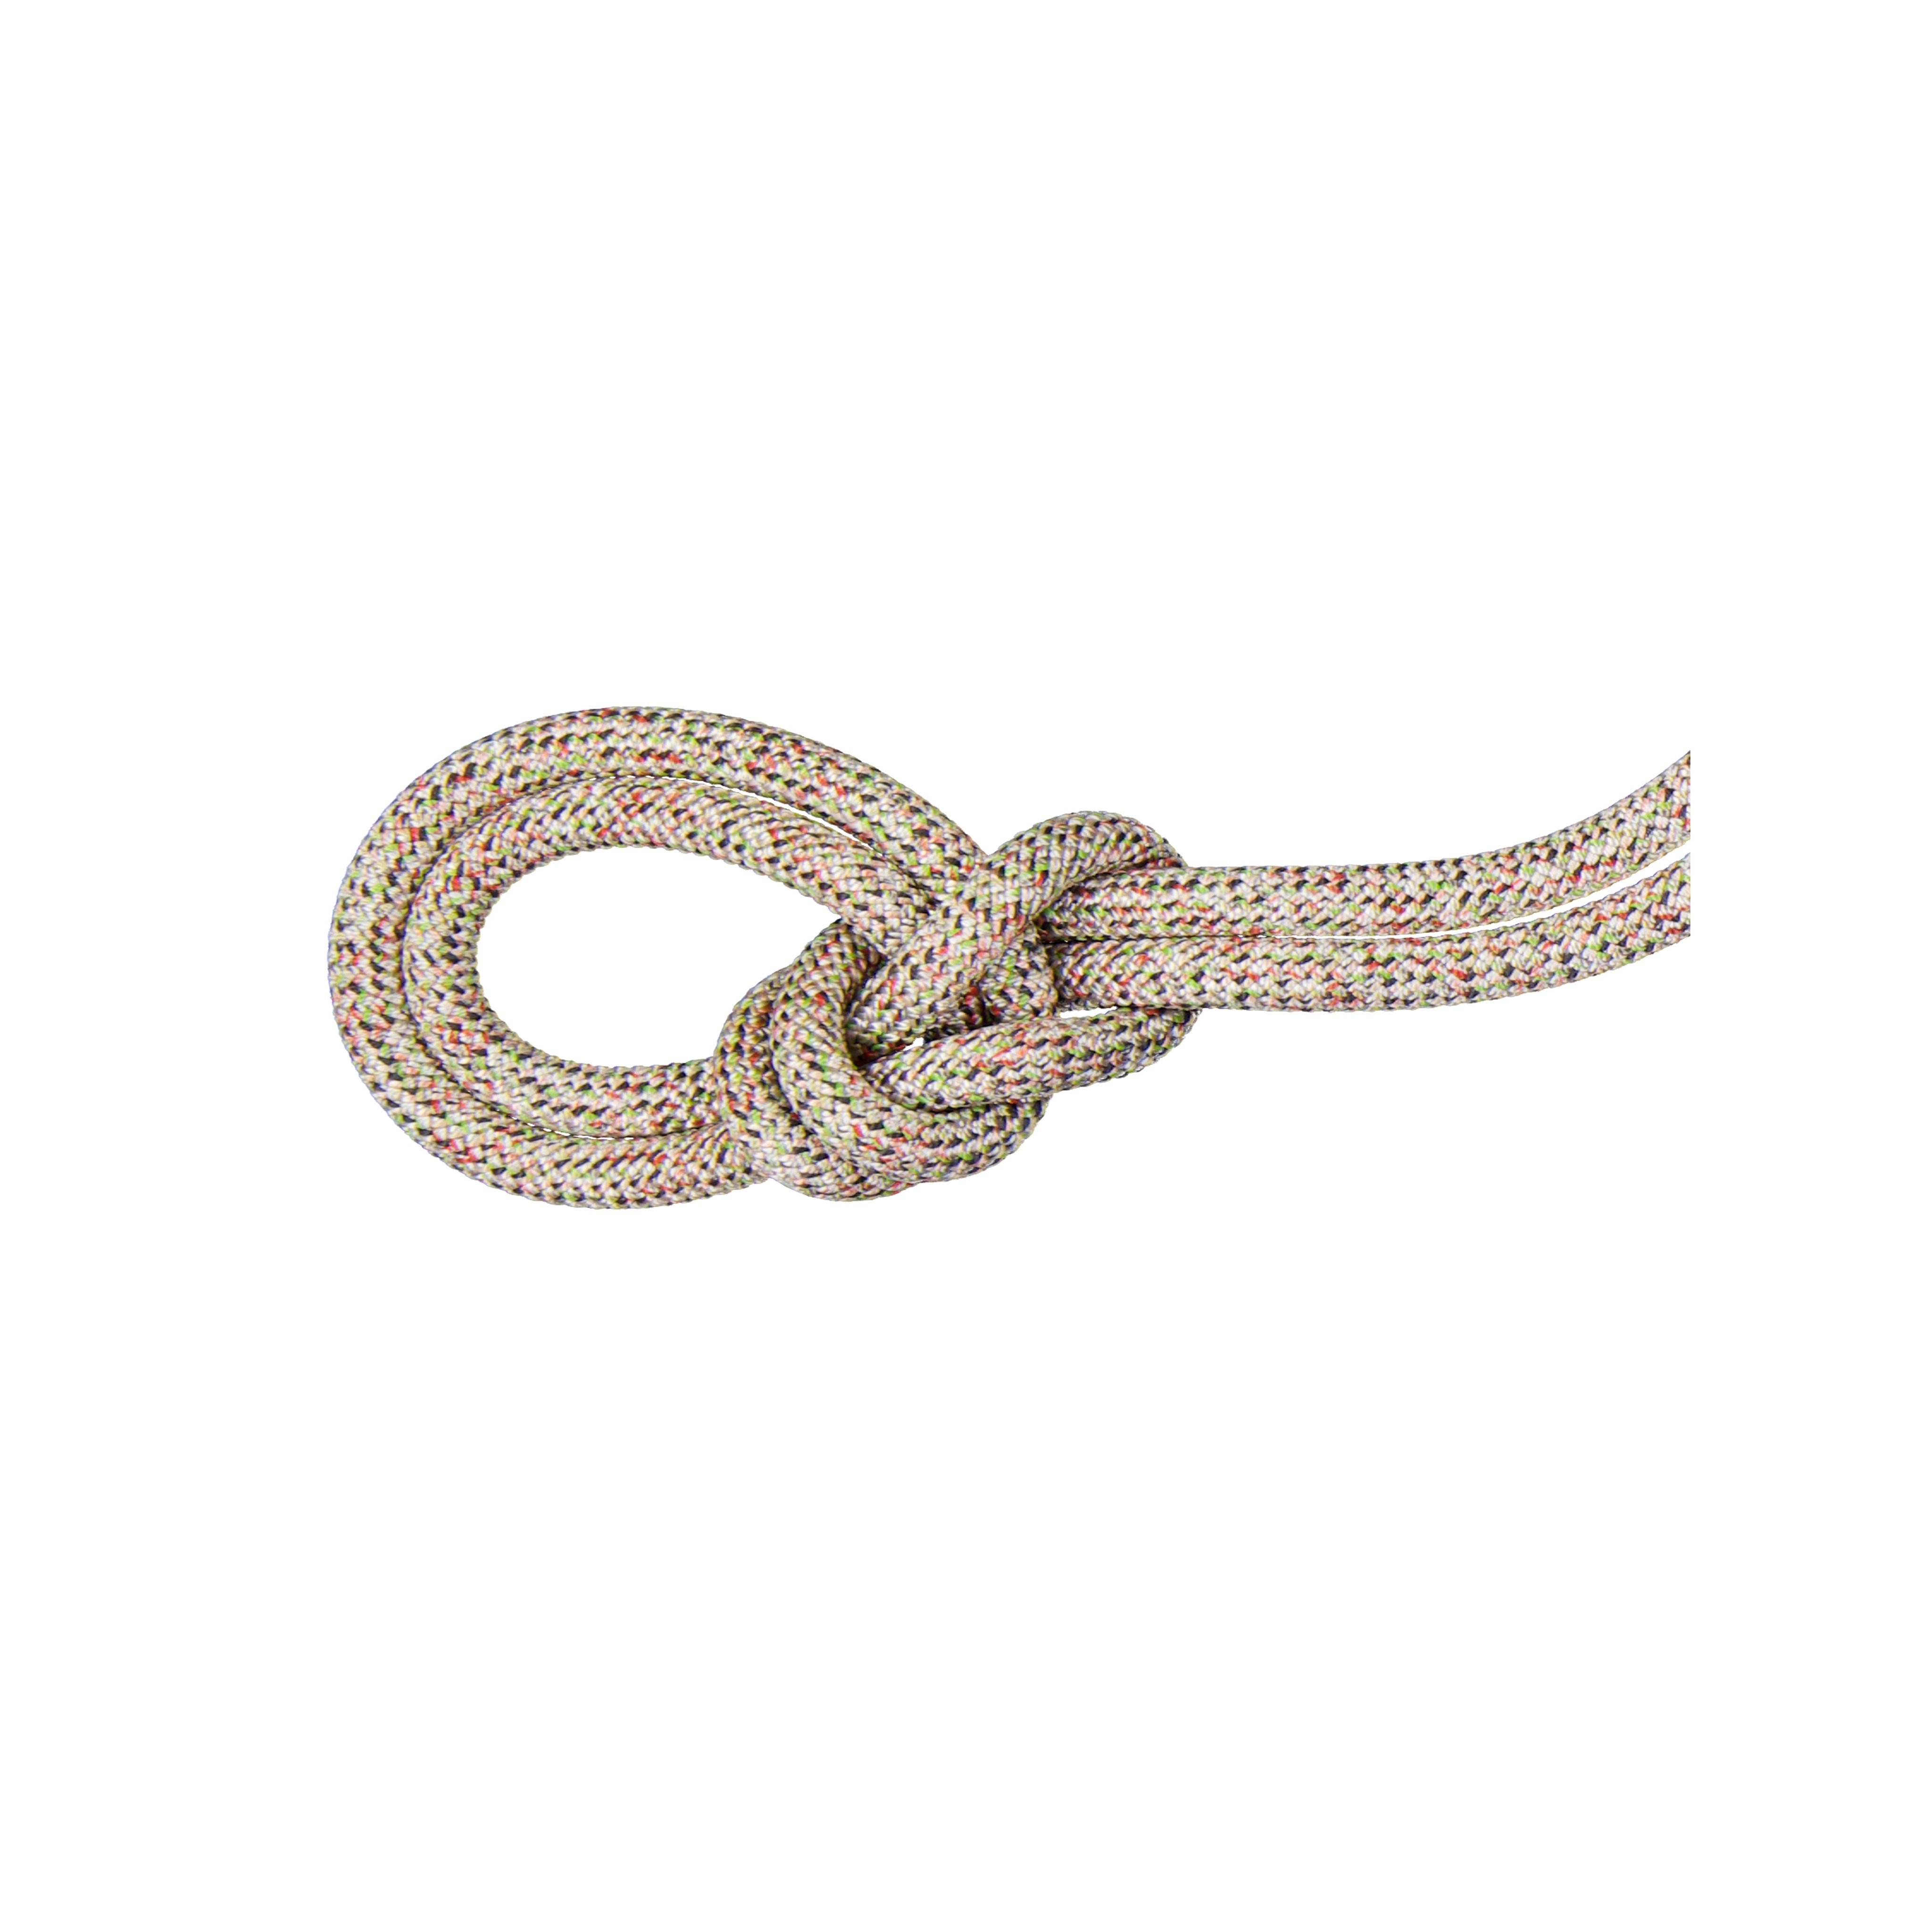 9.5 Crag We Care Classic Rope product image